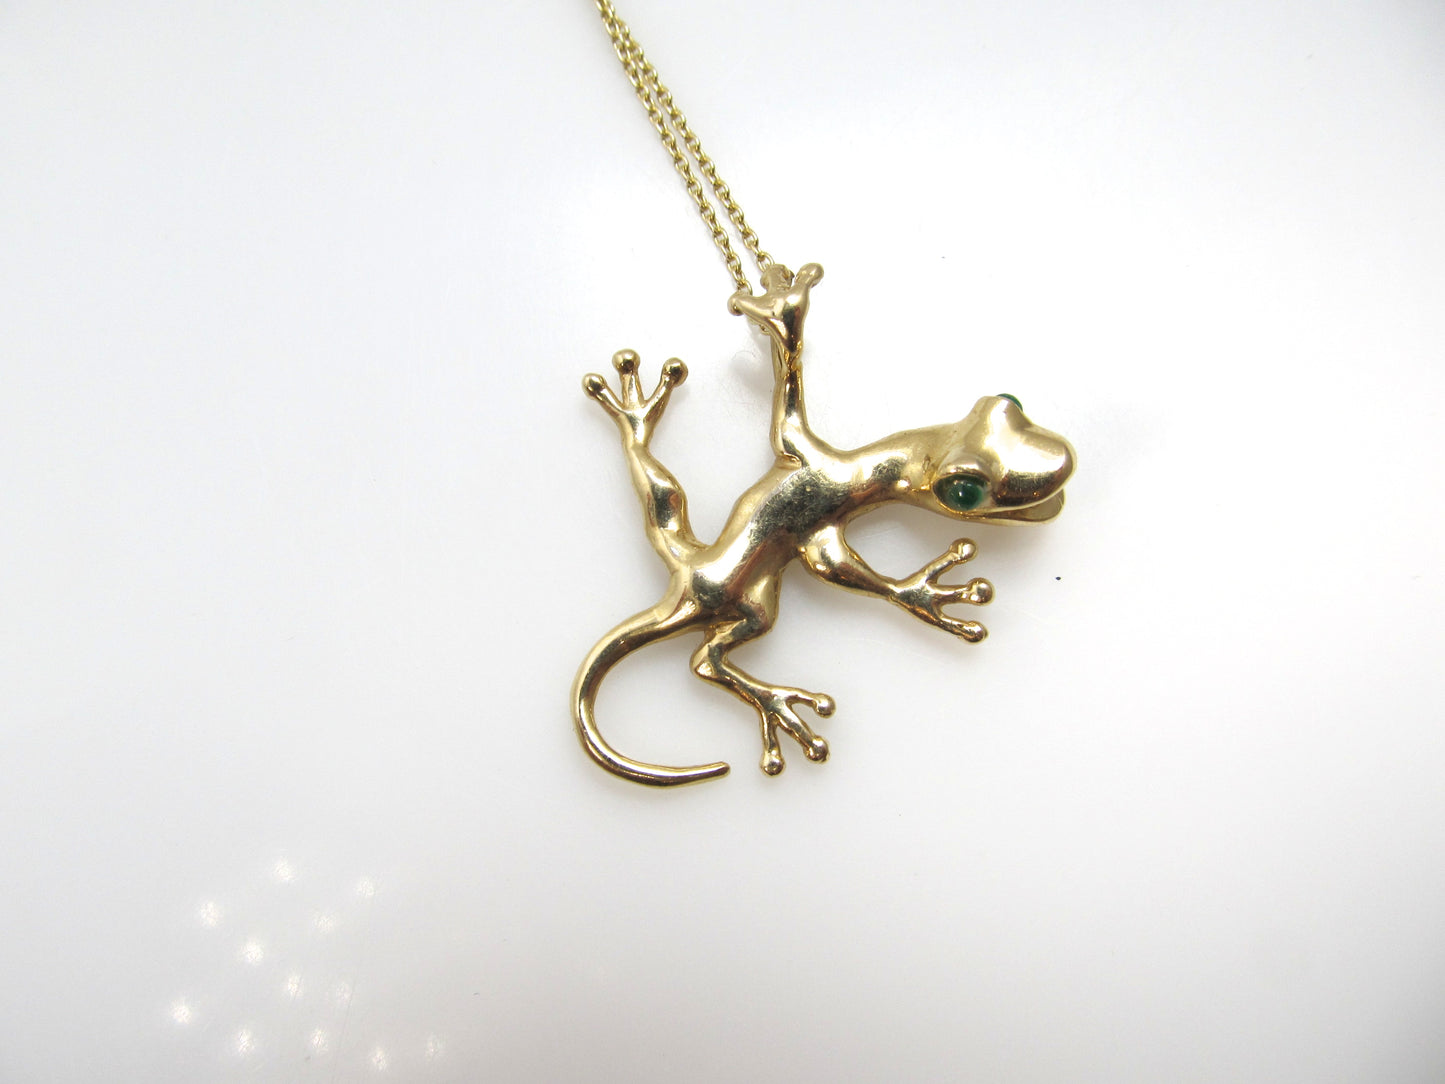 Super cute 14k gold gecko necklace with emerald eyes